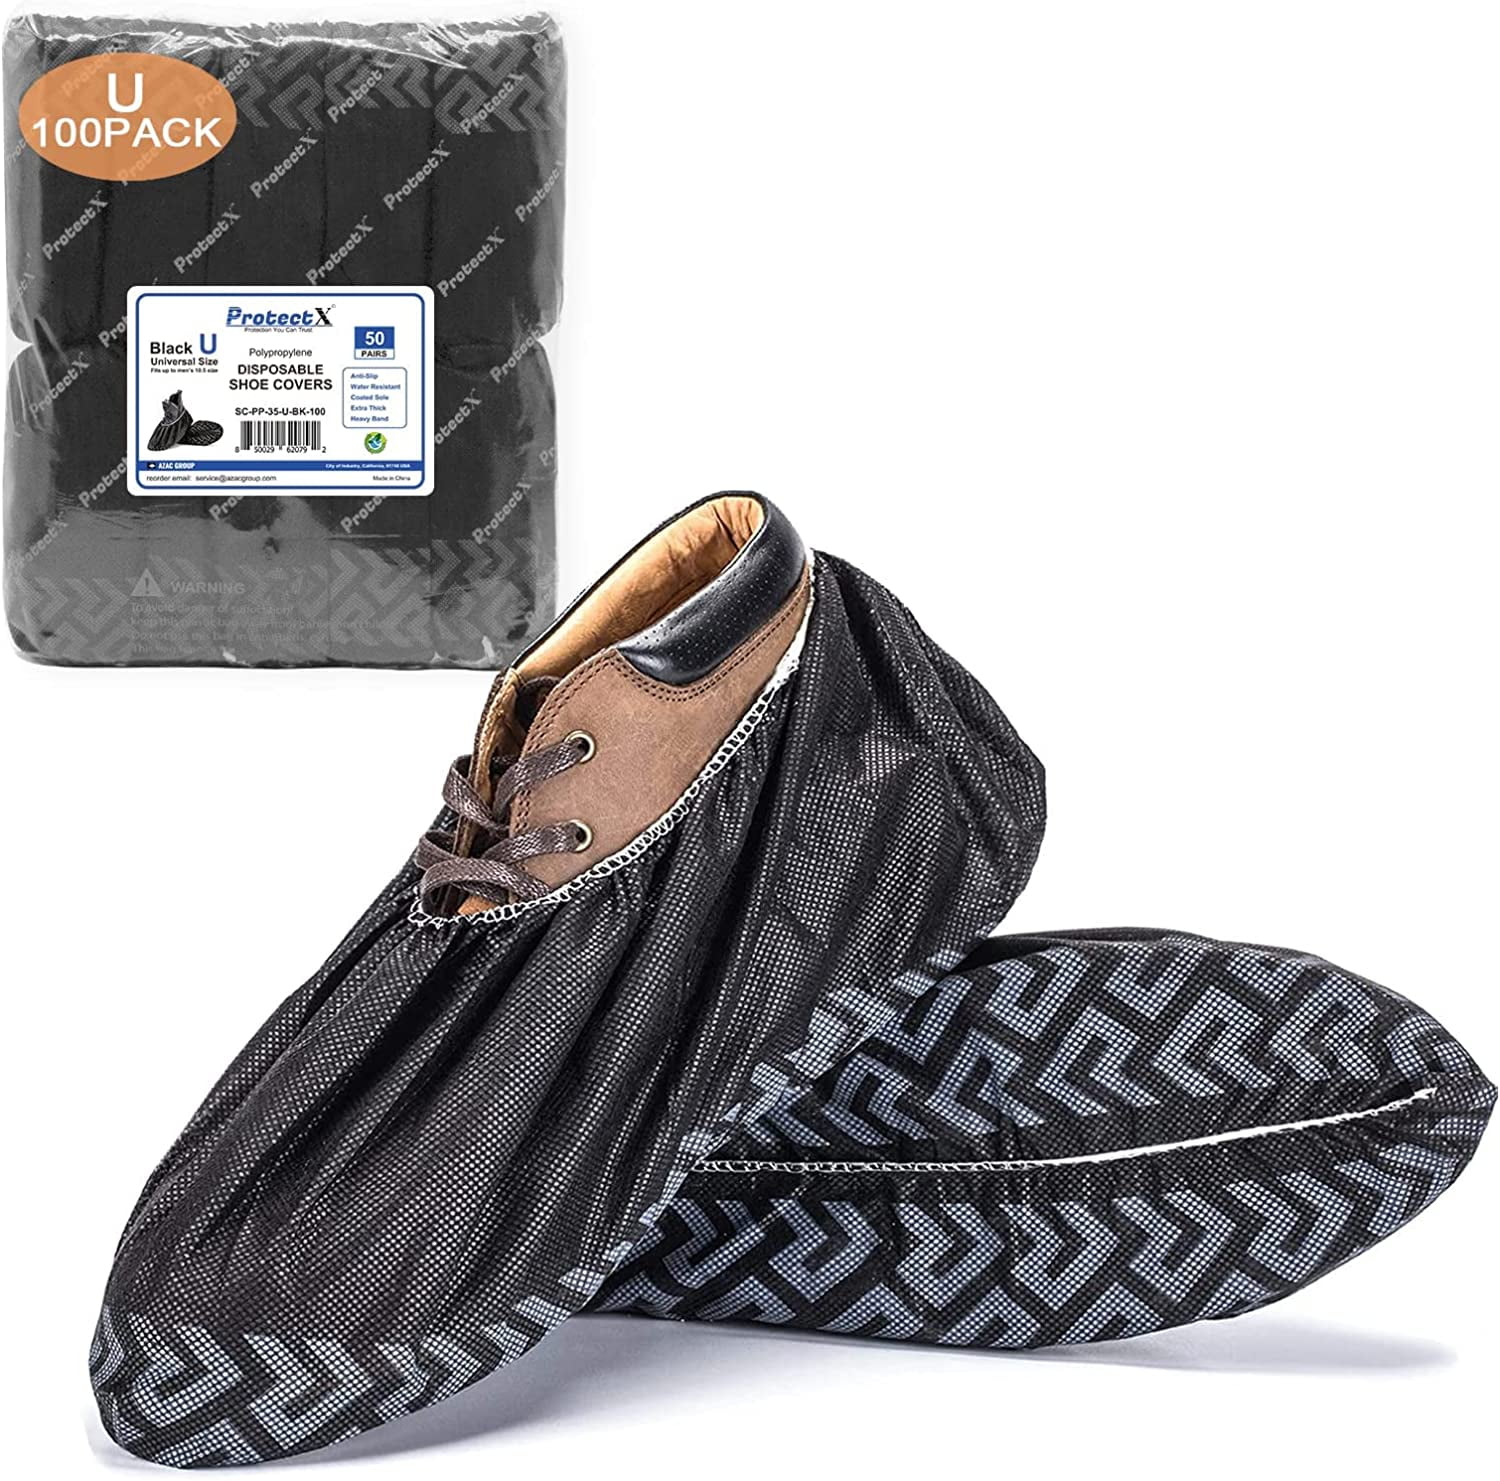 Work Boot/Shoe Covers, 50 Pack